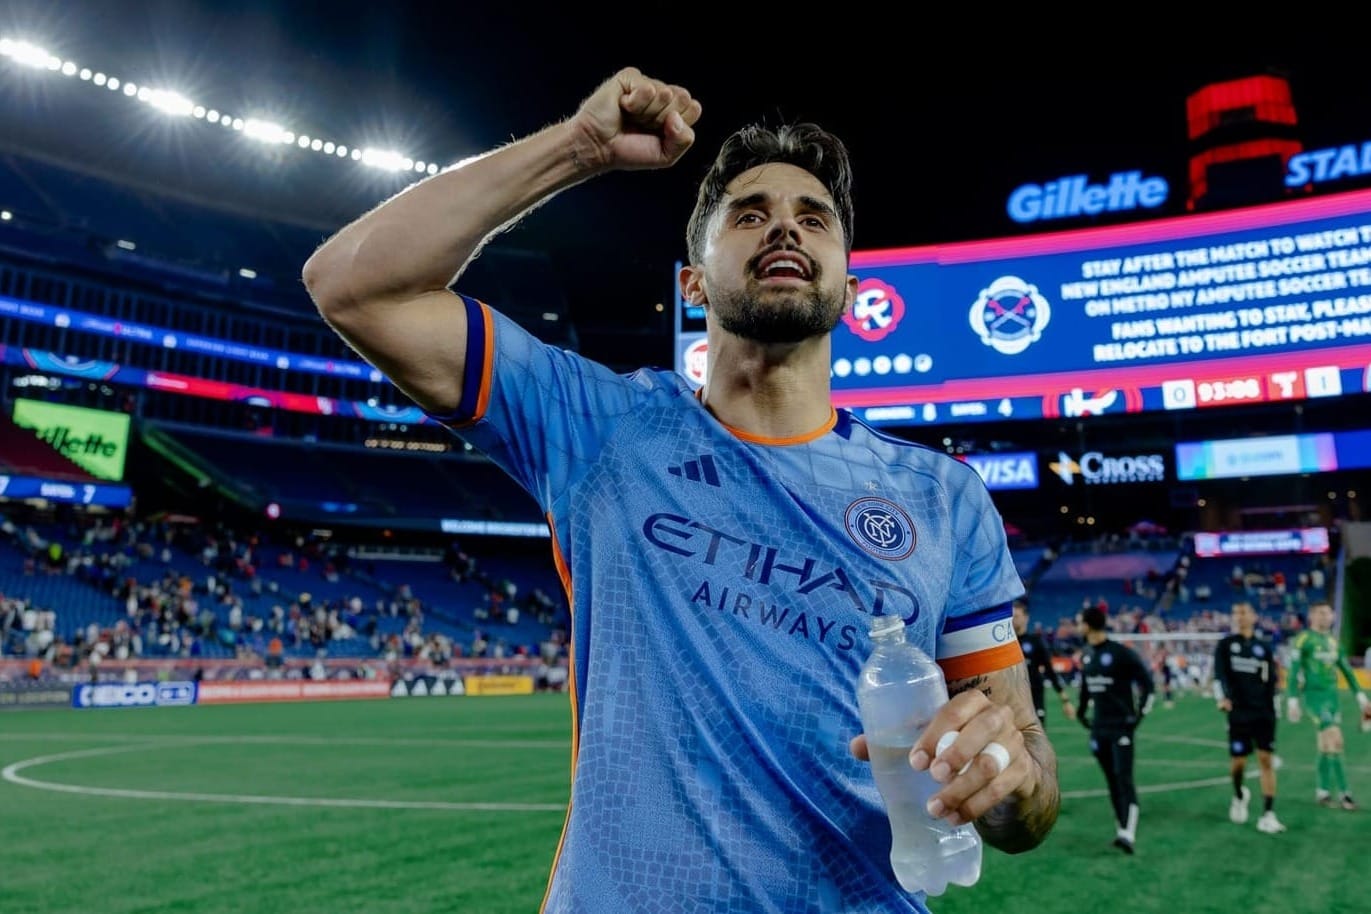 How NYCFC became one of the hottest teams in MLS